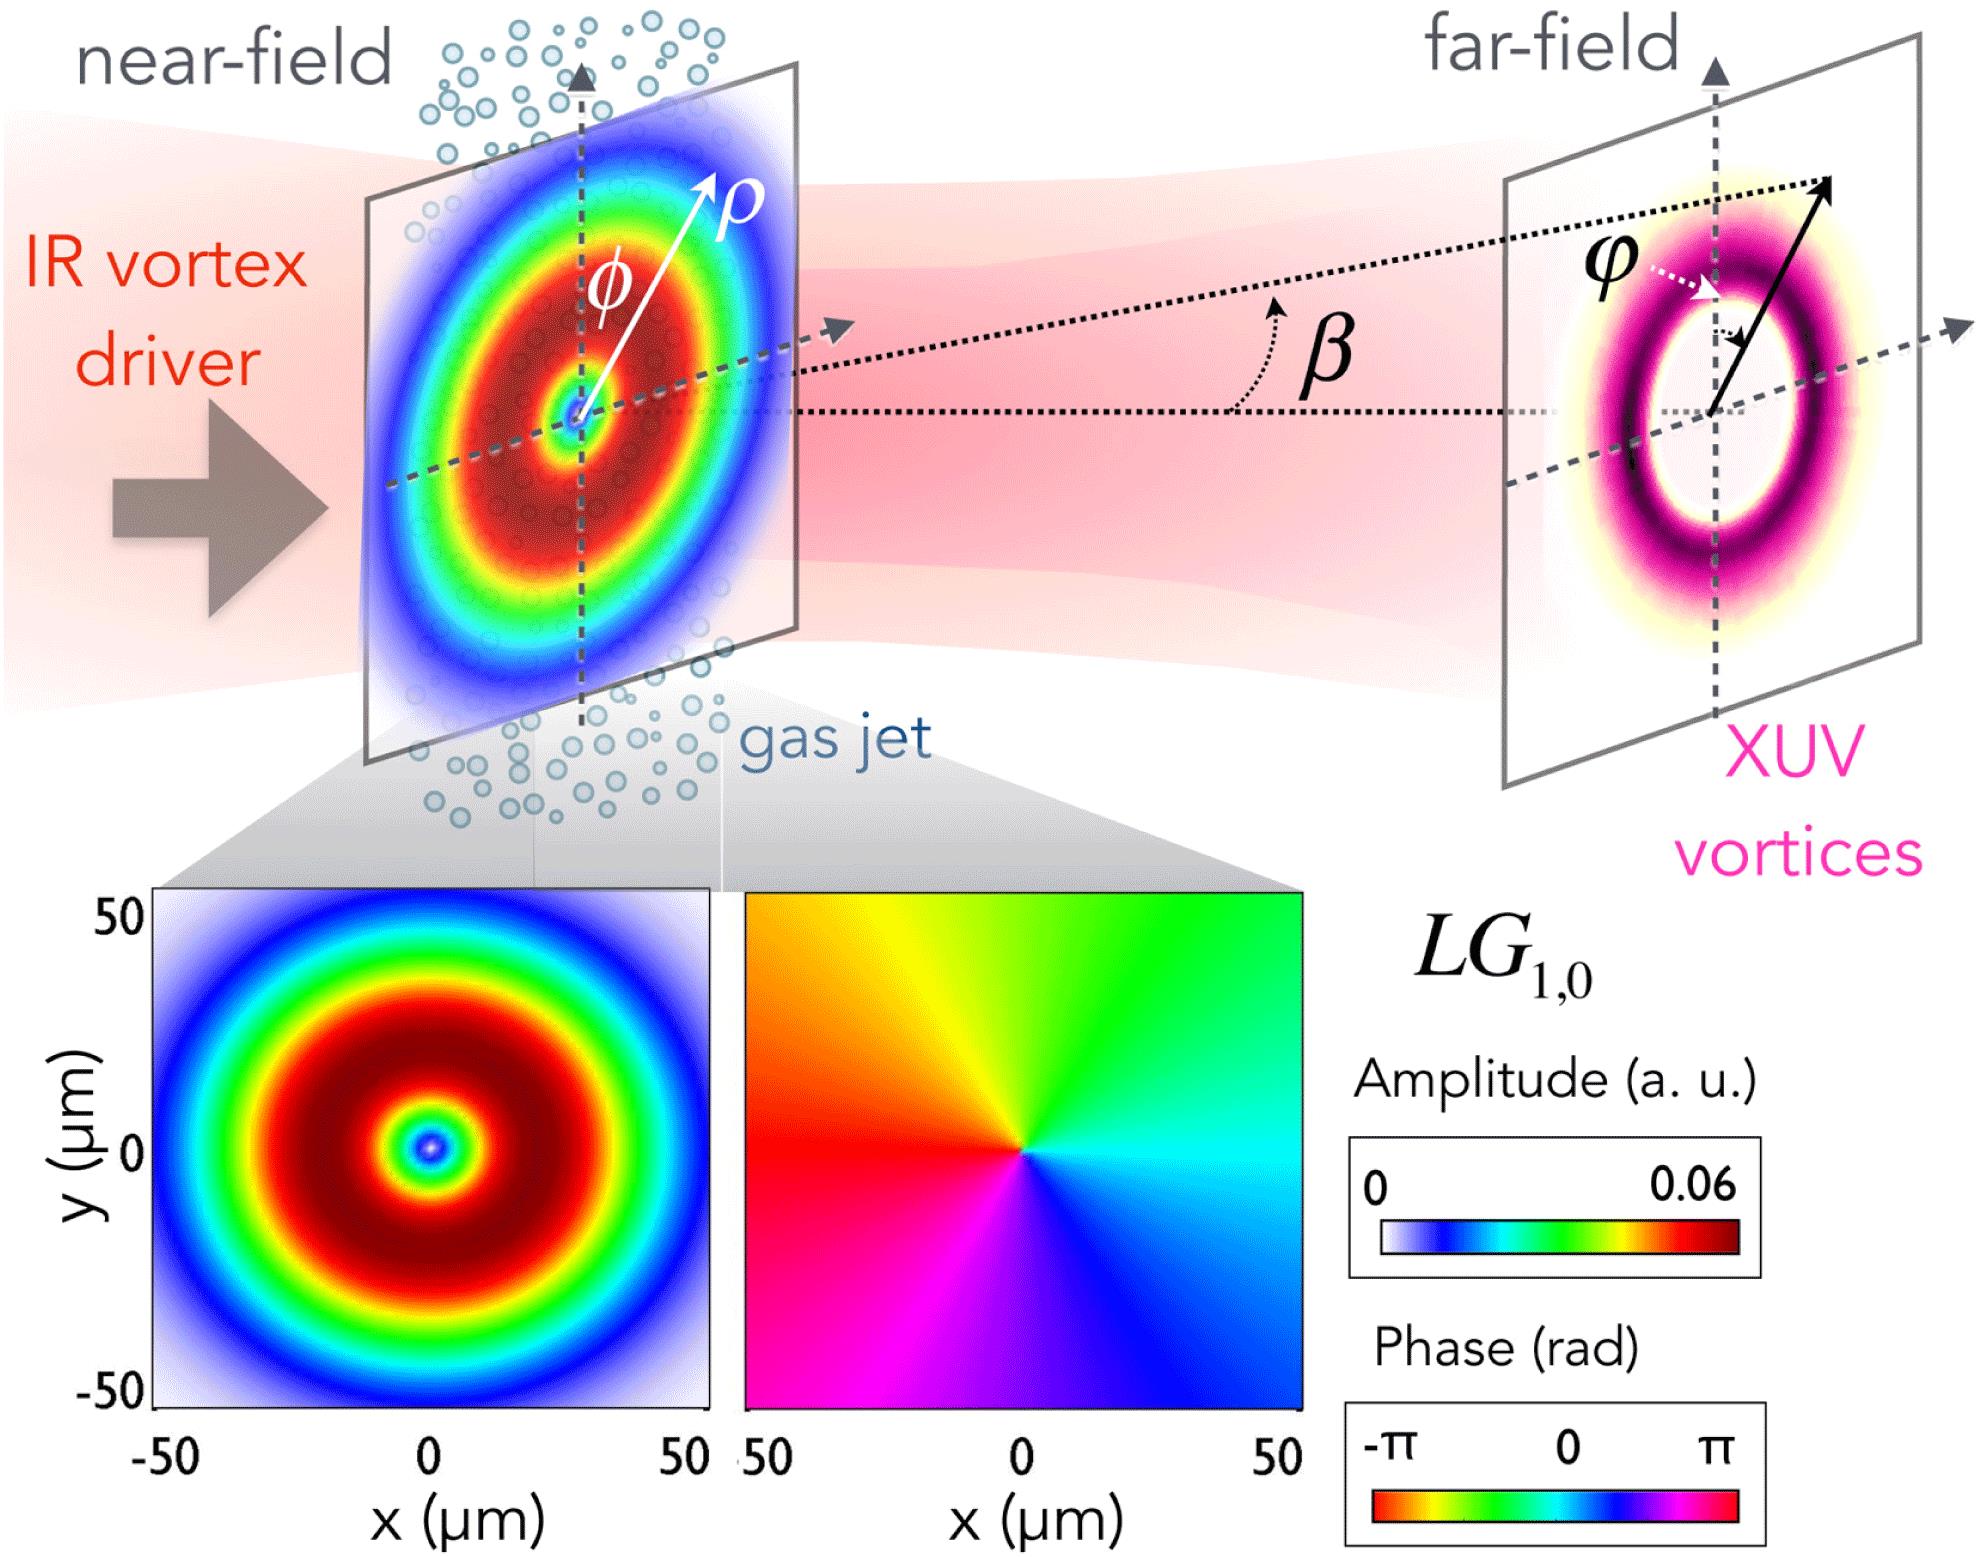 Schematic view of HHG driven by OAM beams. An intense IR vortex beam carrying OAM (with $\ell =1$ in this case), is focused into an argon gas jet. The near-field coordinates are ($\unicode[STIX]{x1D70C},\unicode[STIX]{x1D719}$). Each atom emits HHG radiation that, upon propagation, results in the far-field emission of XUV vortices with some divergence and azimuth ($\unicode[STIX]{x1D6FD},\unicode[STIX]{x1D711}$). In the bottom we show the near-field amplitude (left) and phase (right) of the $LG_{1,0}$ IR mode, with beam waist of $30~\unicode[STIX]{x03BC}\text{m}$.